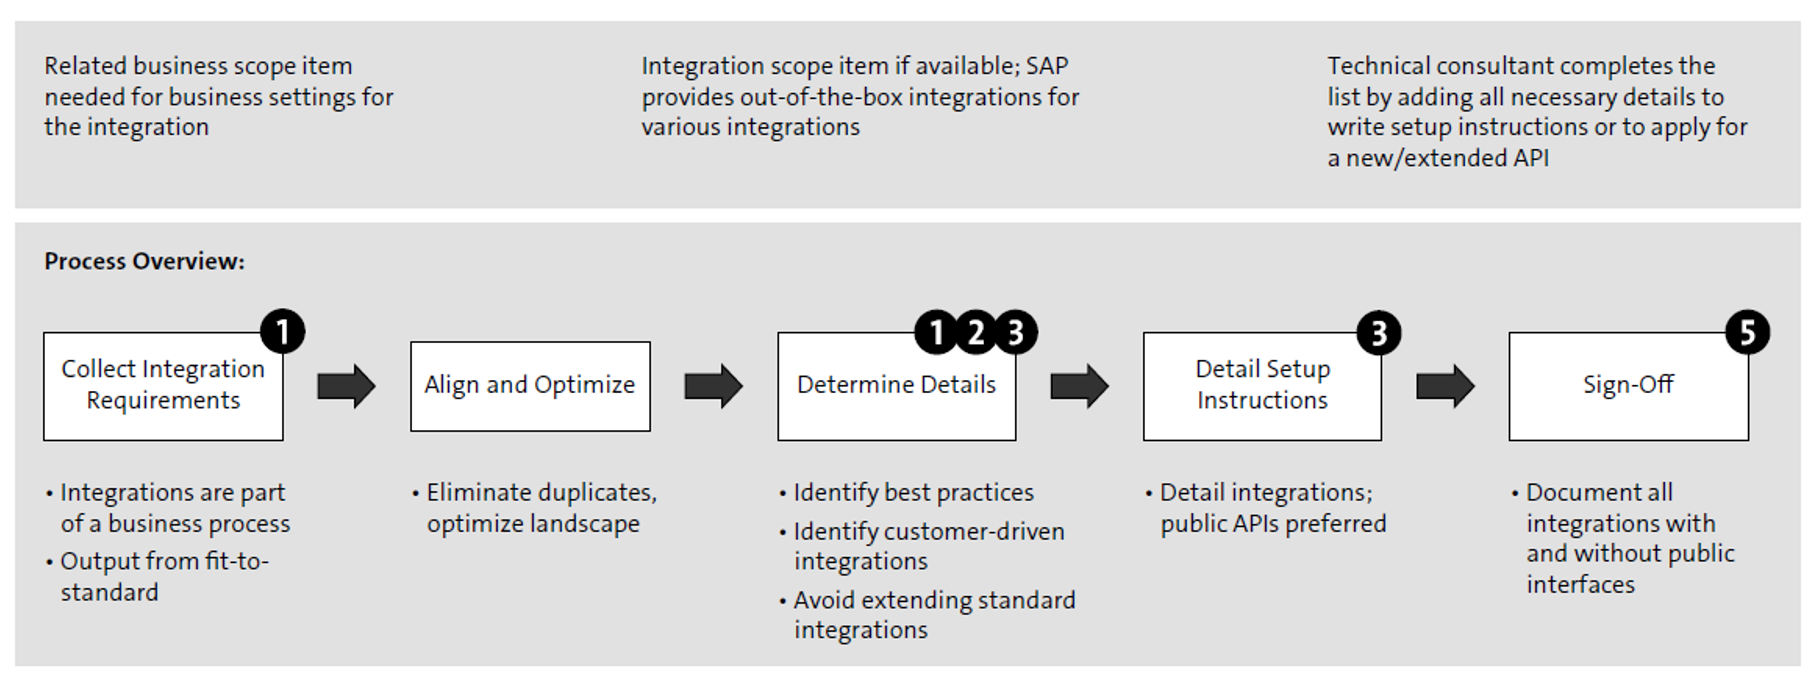 How to Handle Integrations during SAP Activate Projects